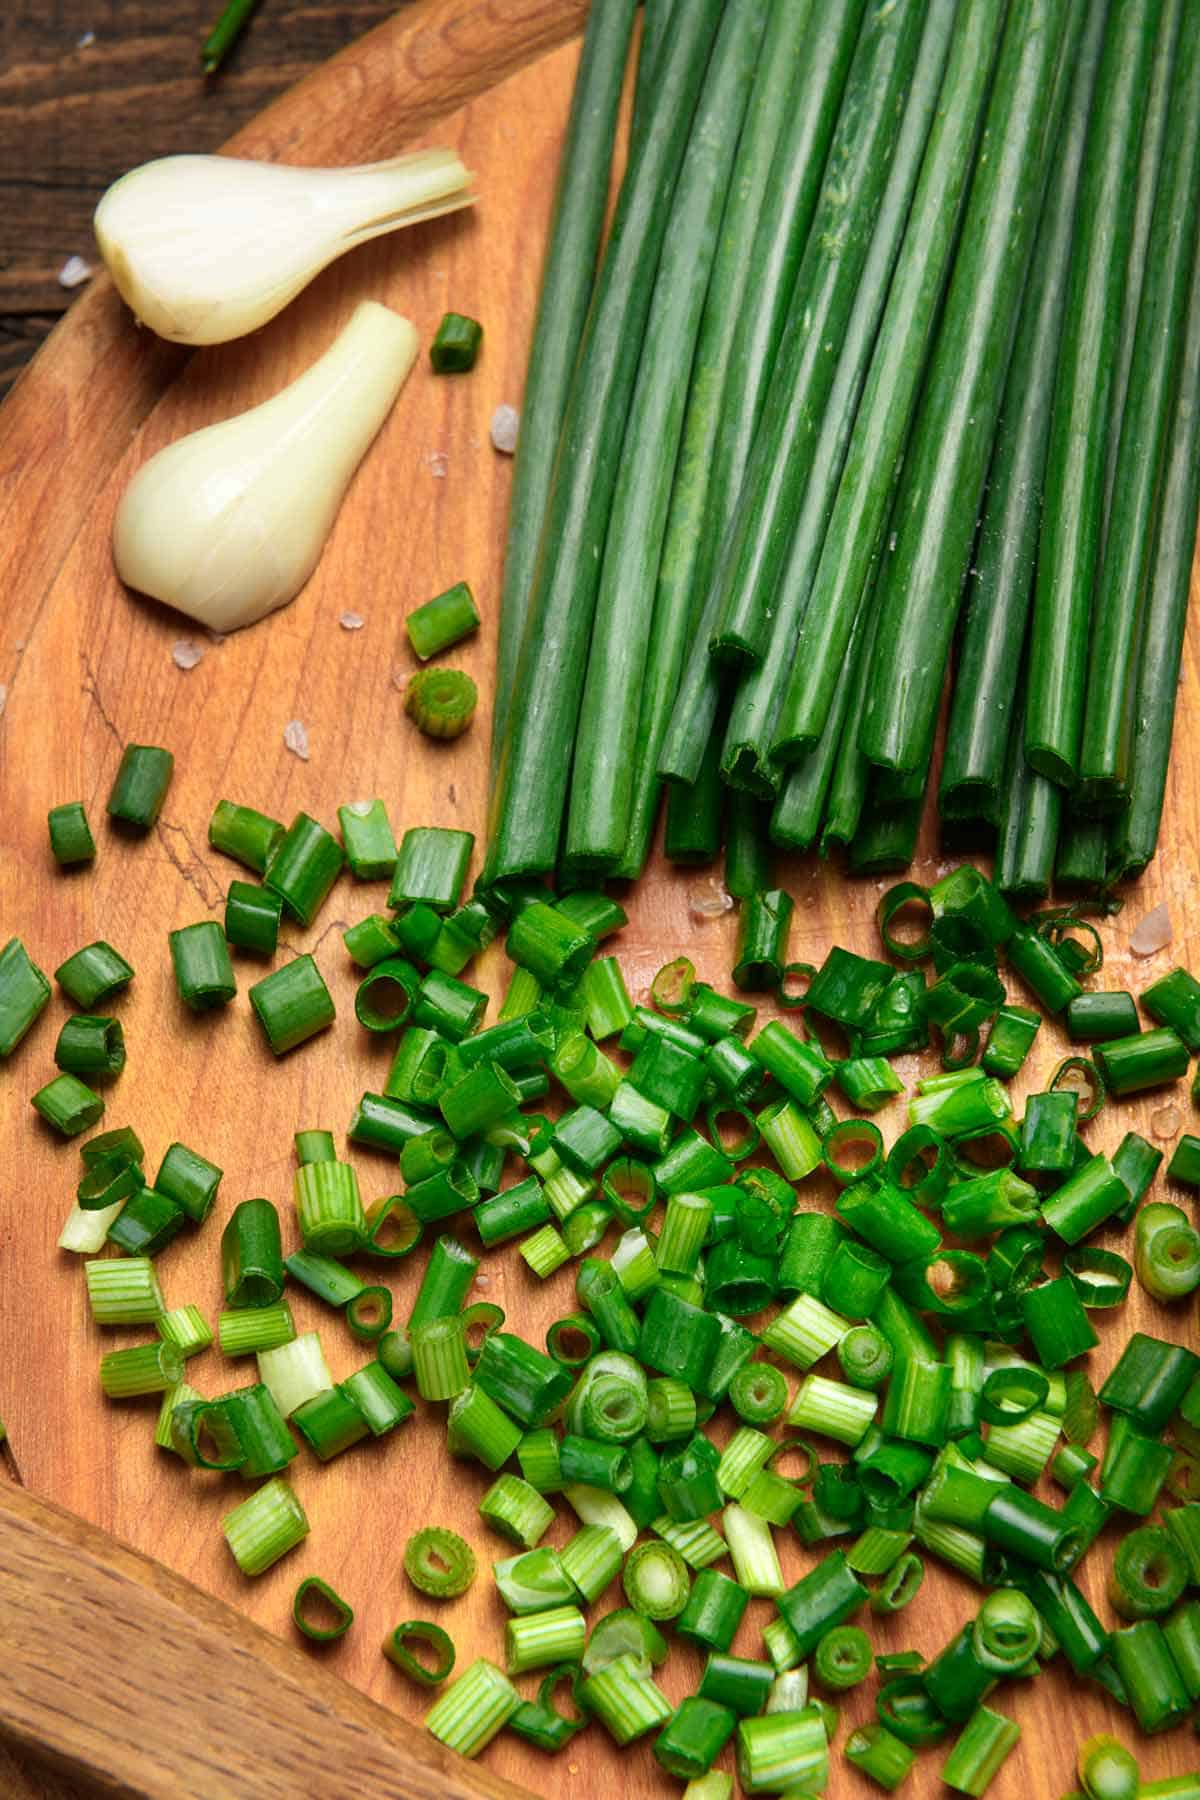 Green onions on a cutting board with some cut and some whole.